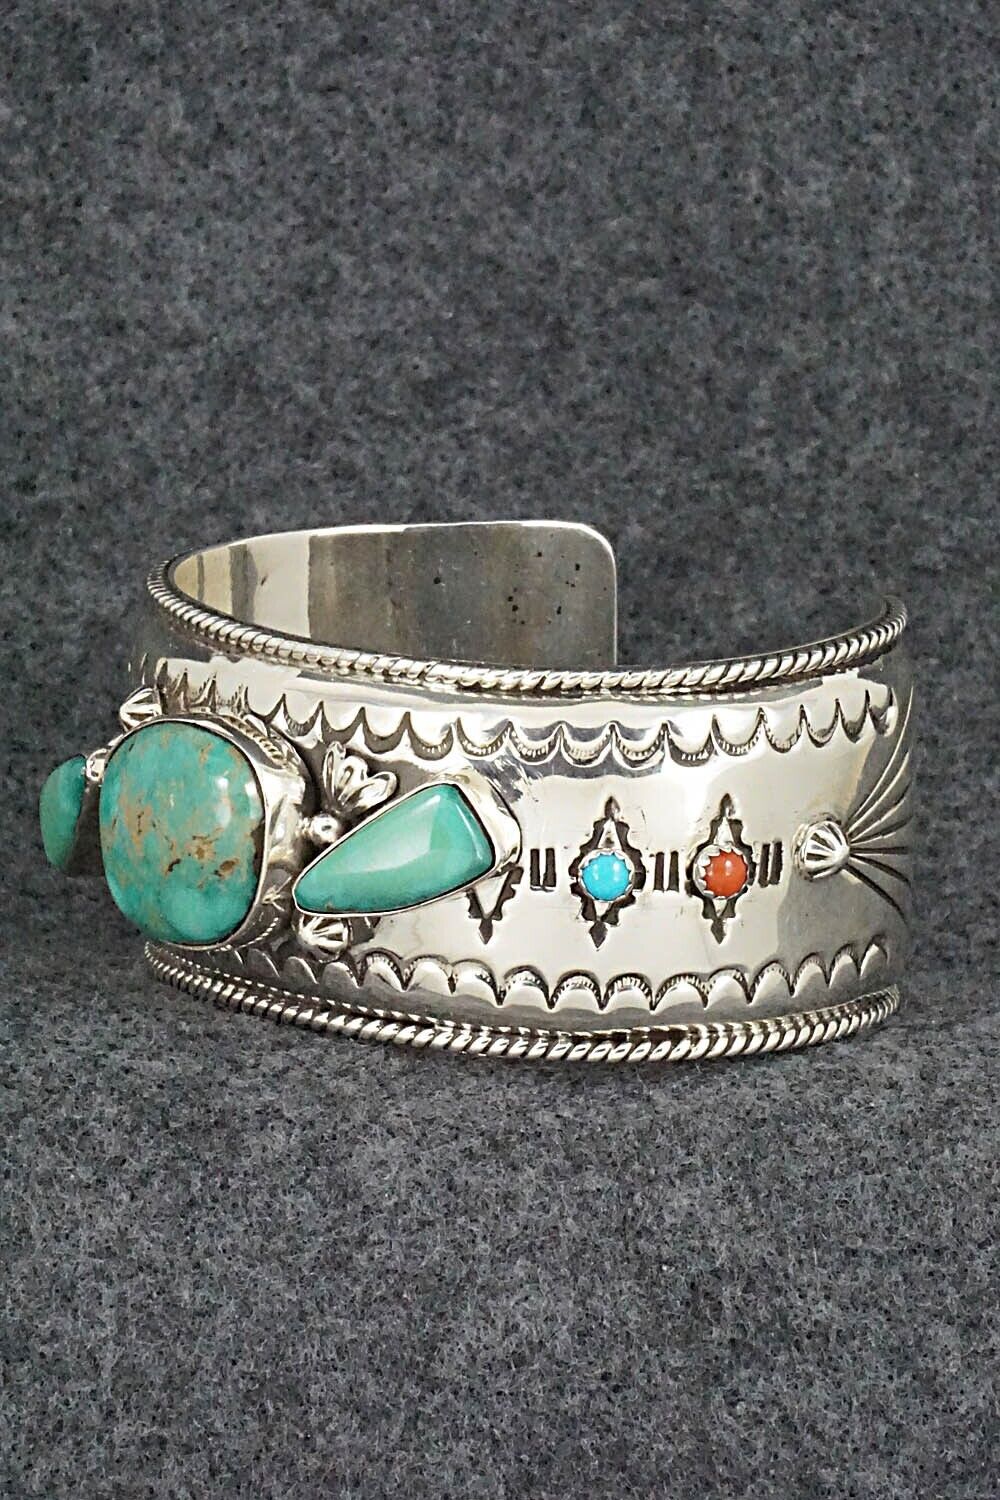 Turquoise, Coral & Sterling Silver Bracelet - Emerson Delgarito